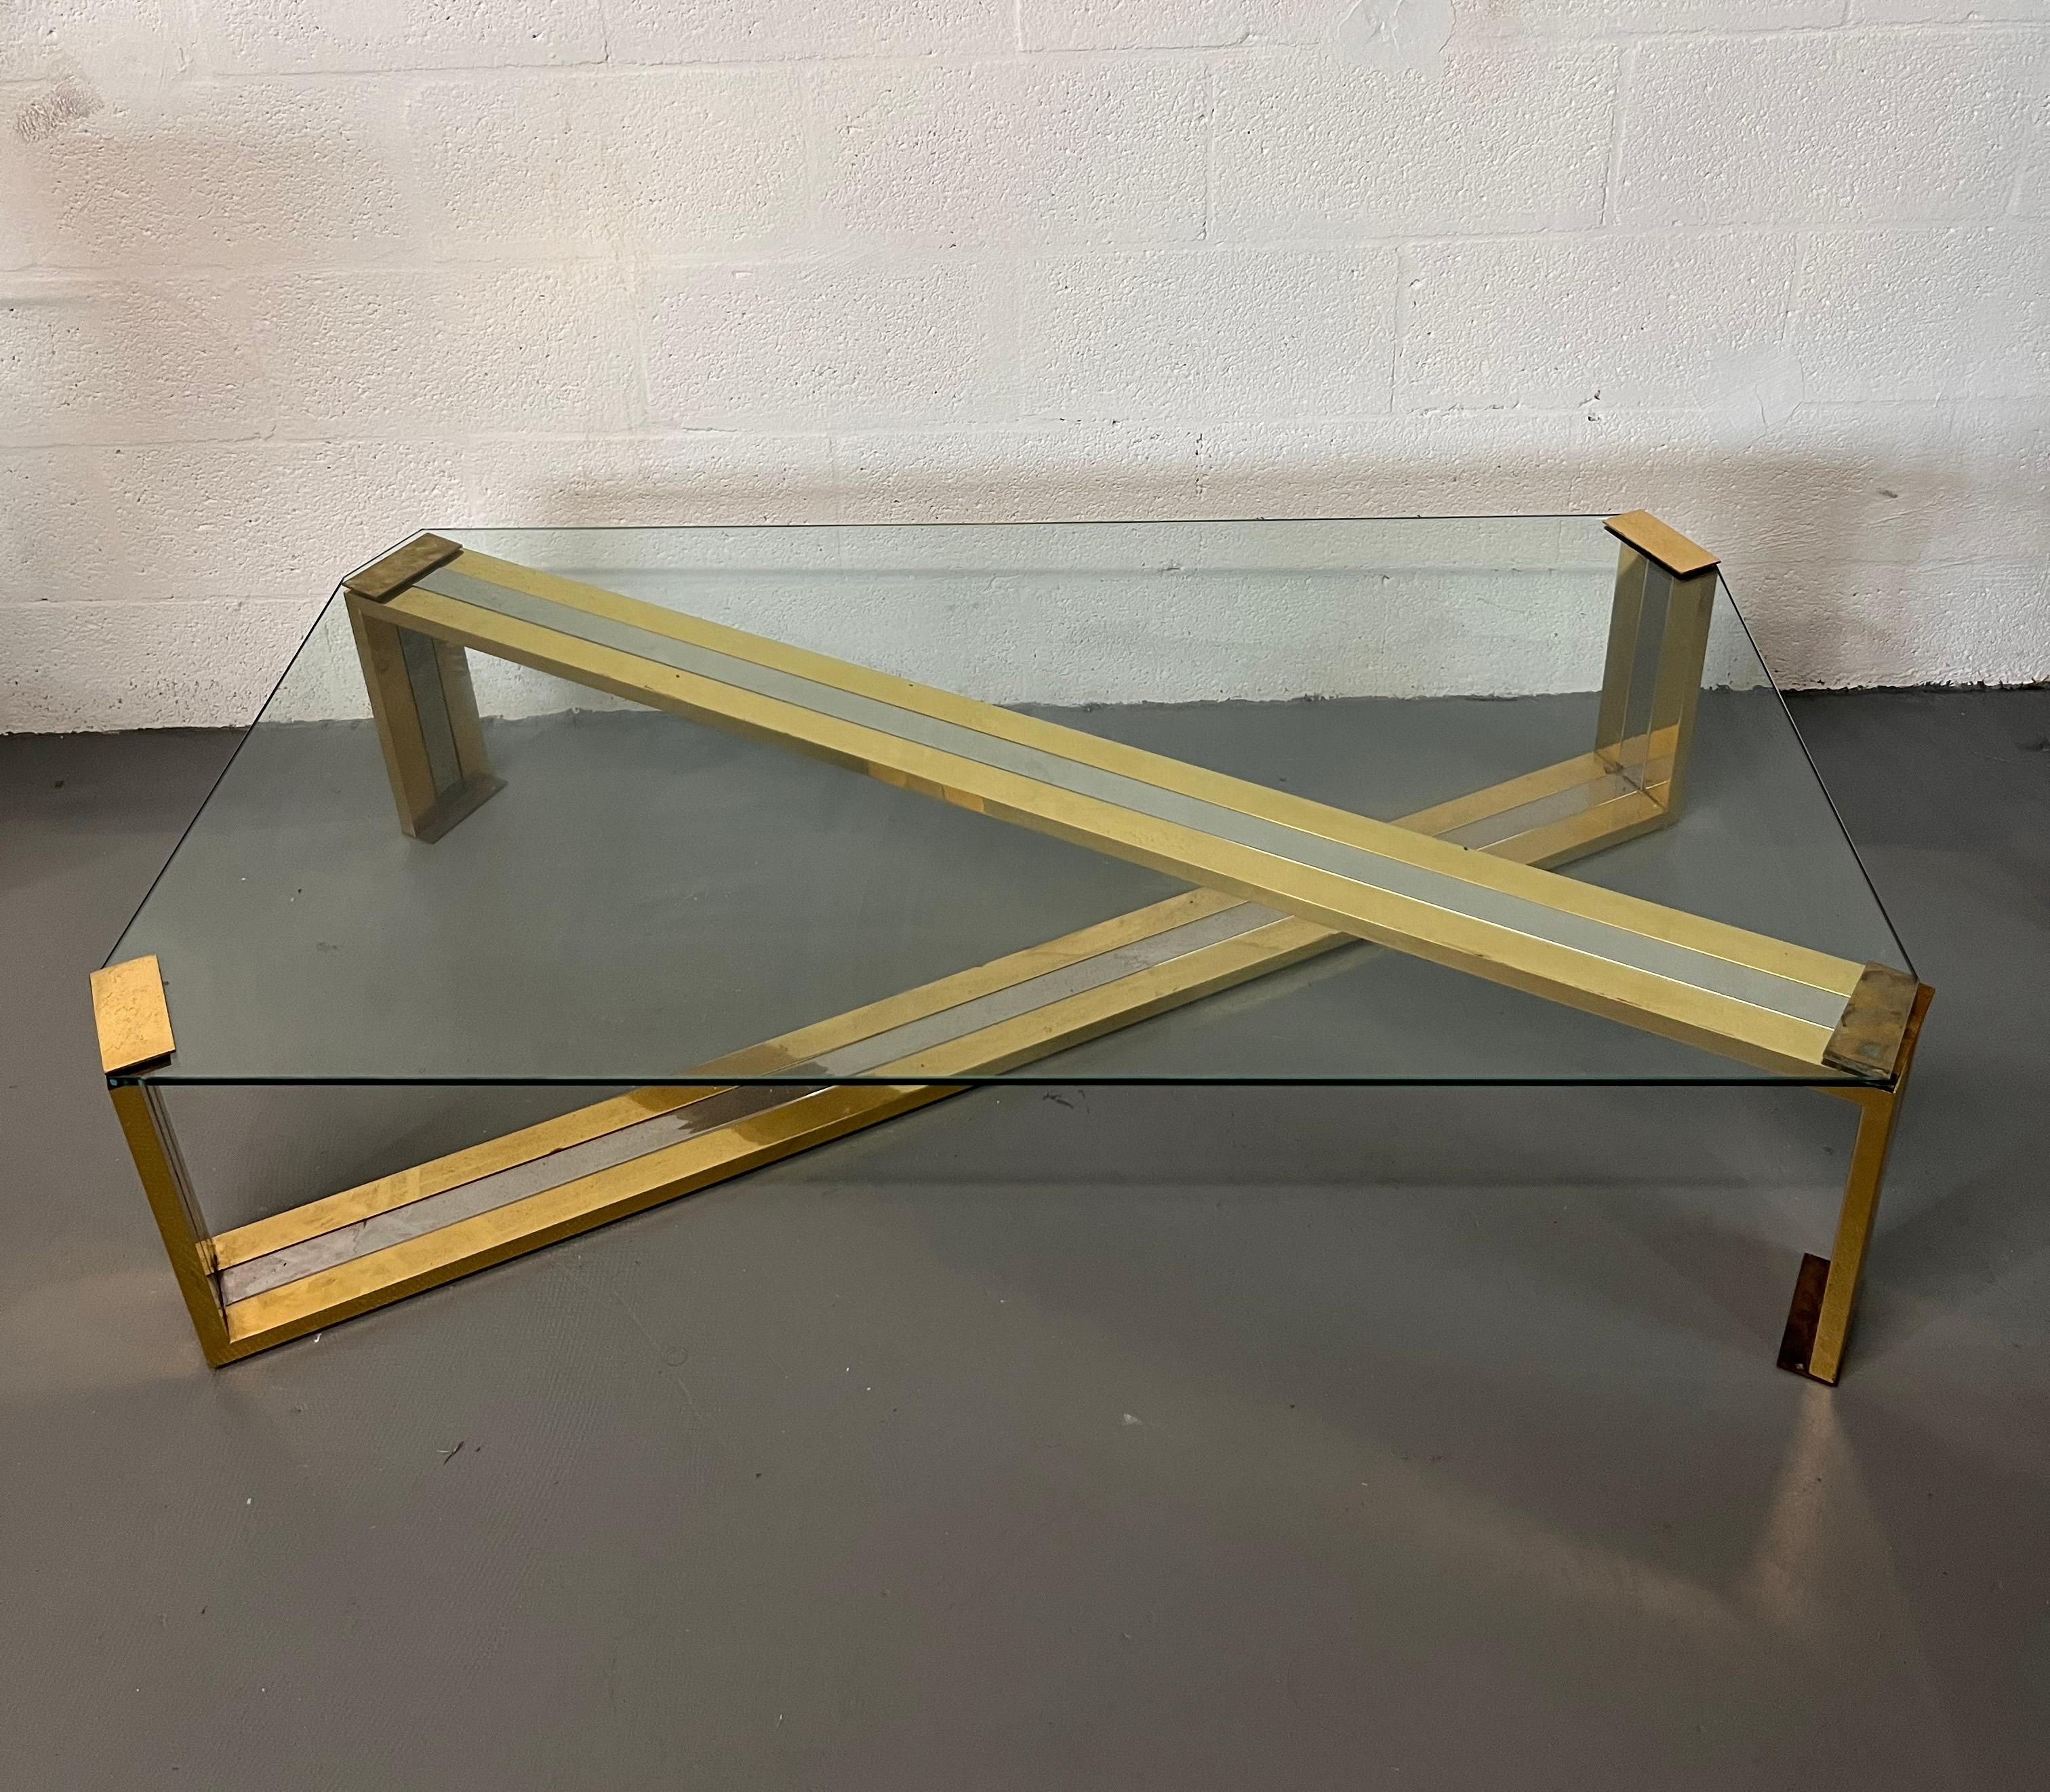 Large coffee table in polished Chrome and Brass  metalwork with thick glass top.
Mastercraft style
New York designer circa 1980